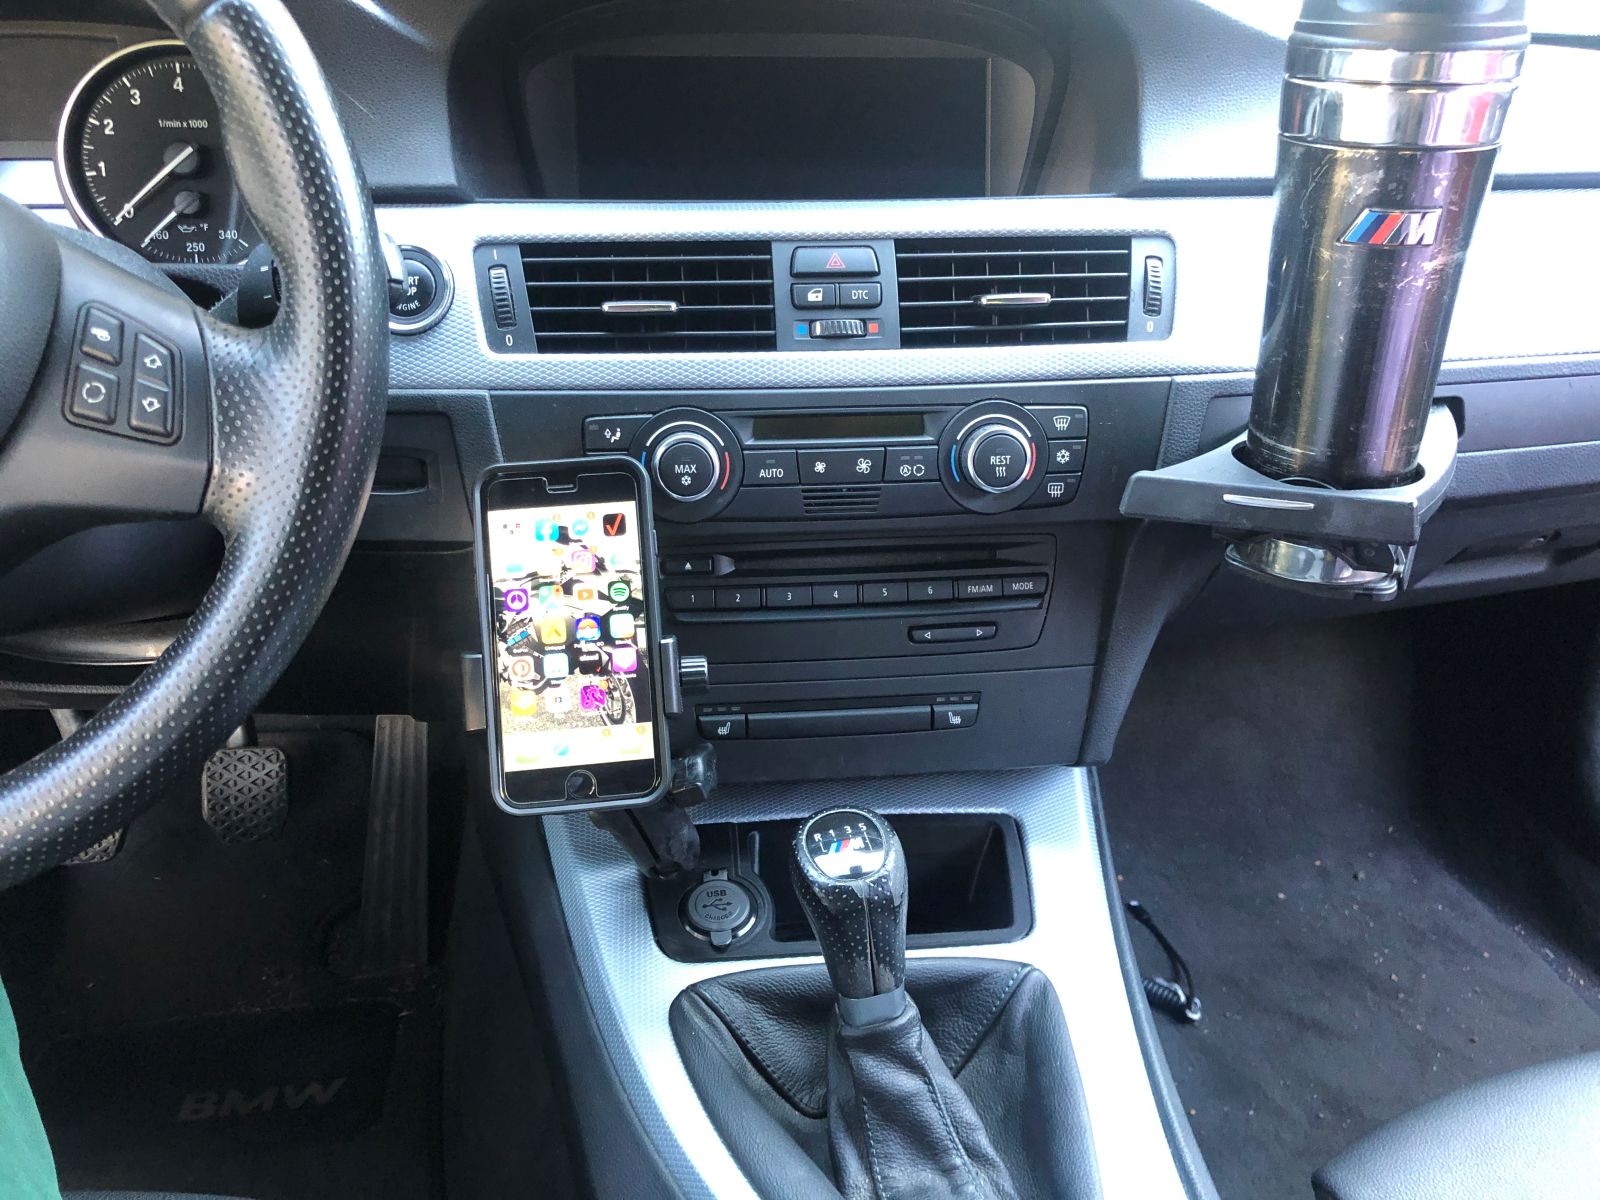 Illustration for article titled E9X phone holder prototype number two had been installed in my car